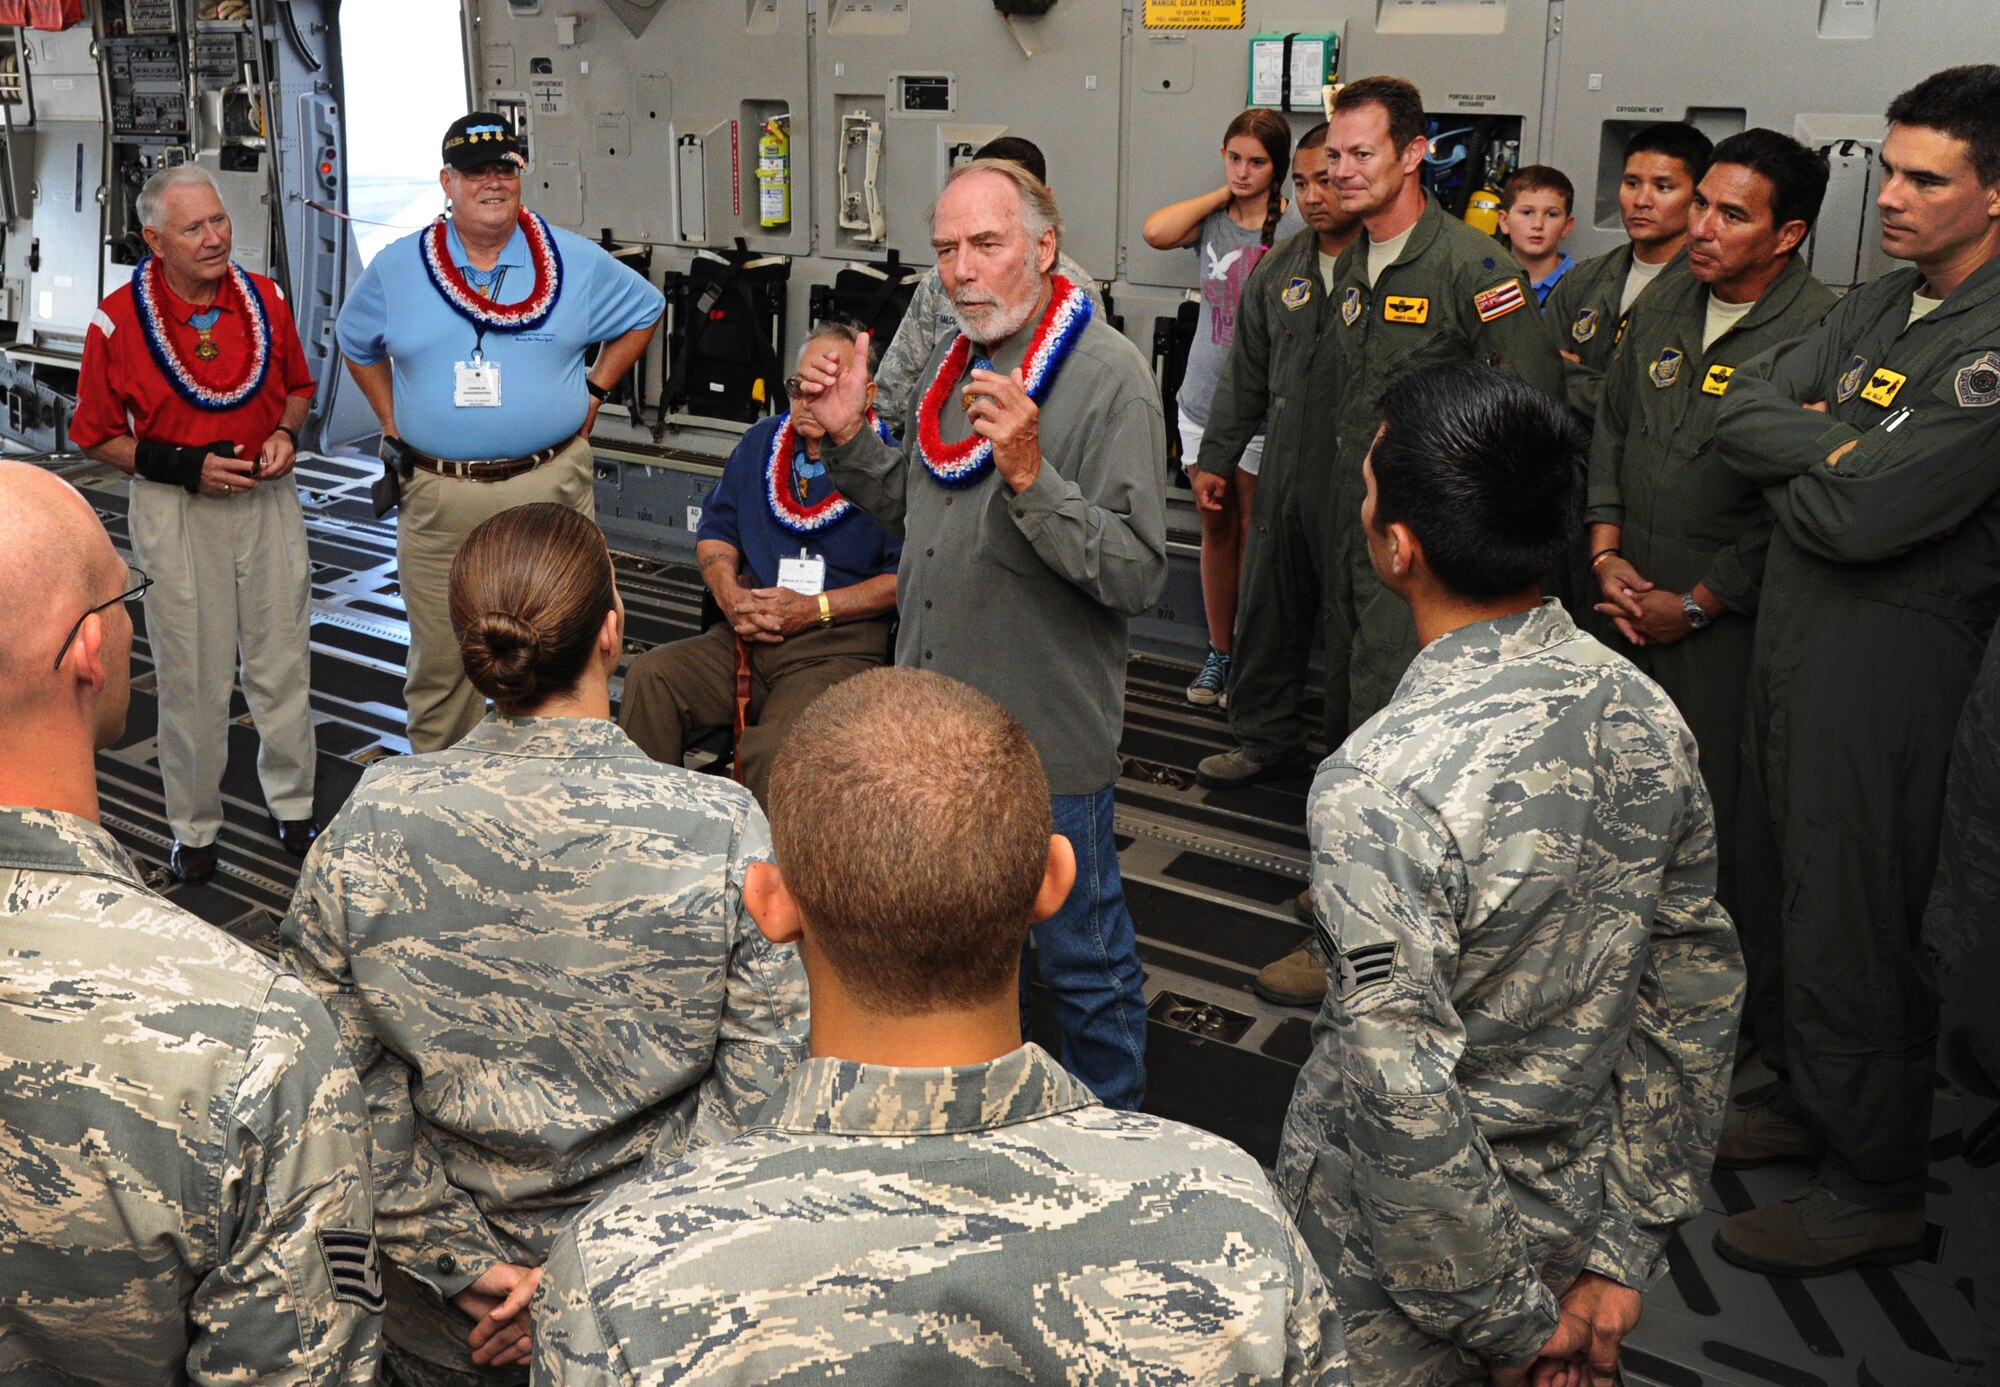 Maj. (Ret.) Drew Dix, a U.S. Army veteran of the Vietnam War and Medal of Honor recipient, speaks to Airmen about his military service while touring a static C-17 Globemaster III on Joint Base Pearl Harbor-Hickam, Hawaii, Oct. 4. Dix was a Staff Sgt. in 1968 when he performed the actions that earned him his Medal of Honor which was later presented by President Lyndon B. Johnson in 1969. (U.S. Air Force photo/Senior Airman Lauren Main)